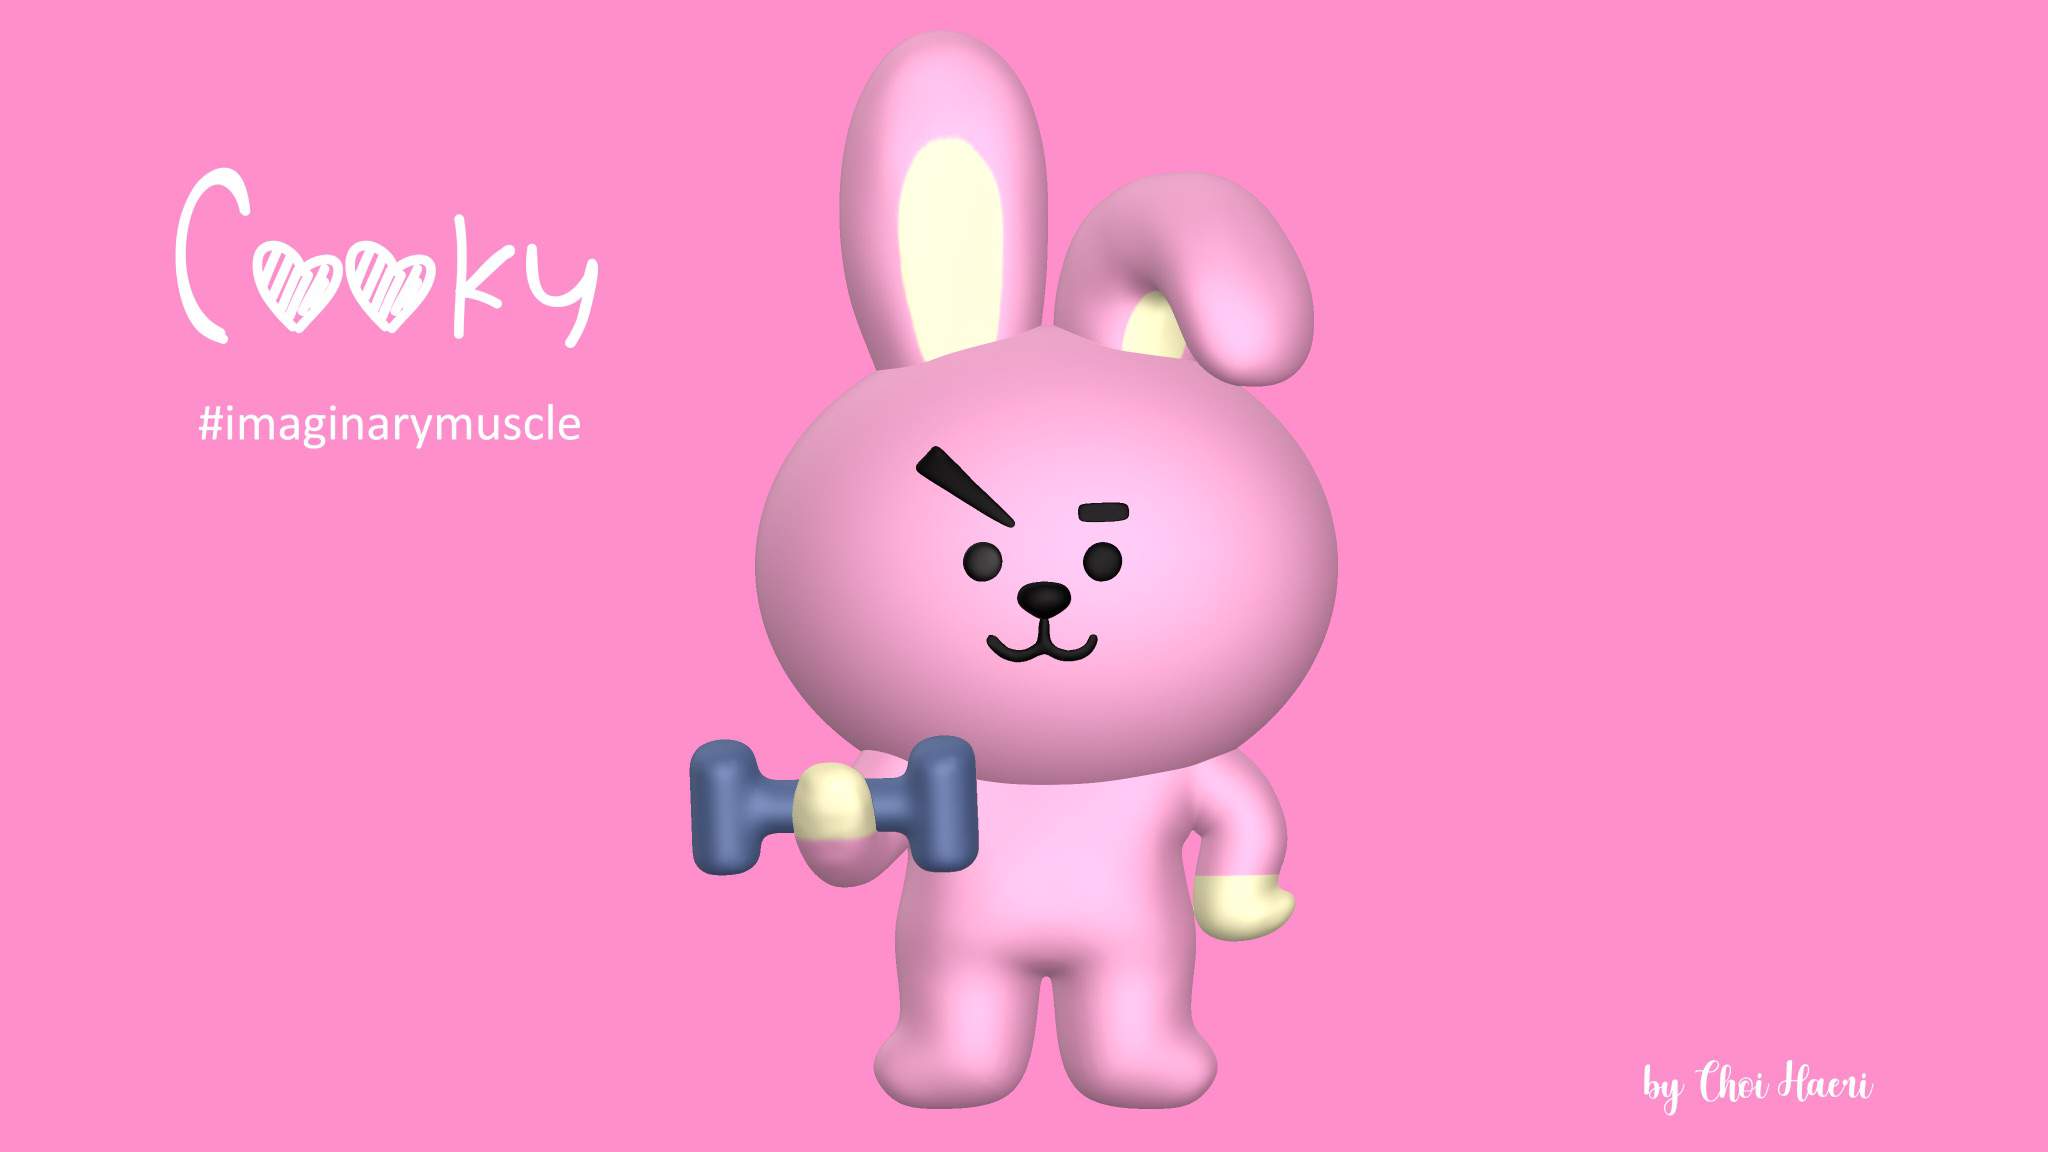 Bt21 COOKY 3D model !. ARMY's Amino